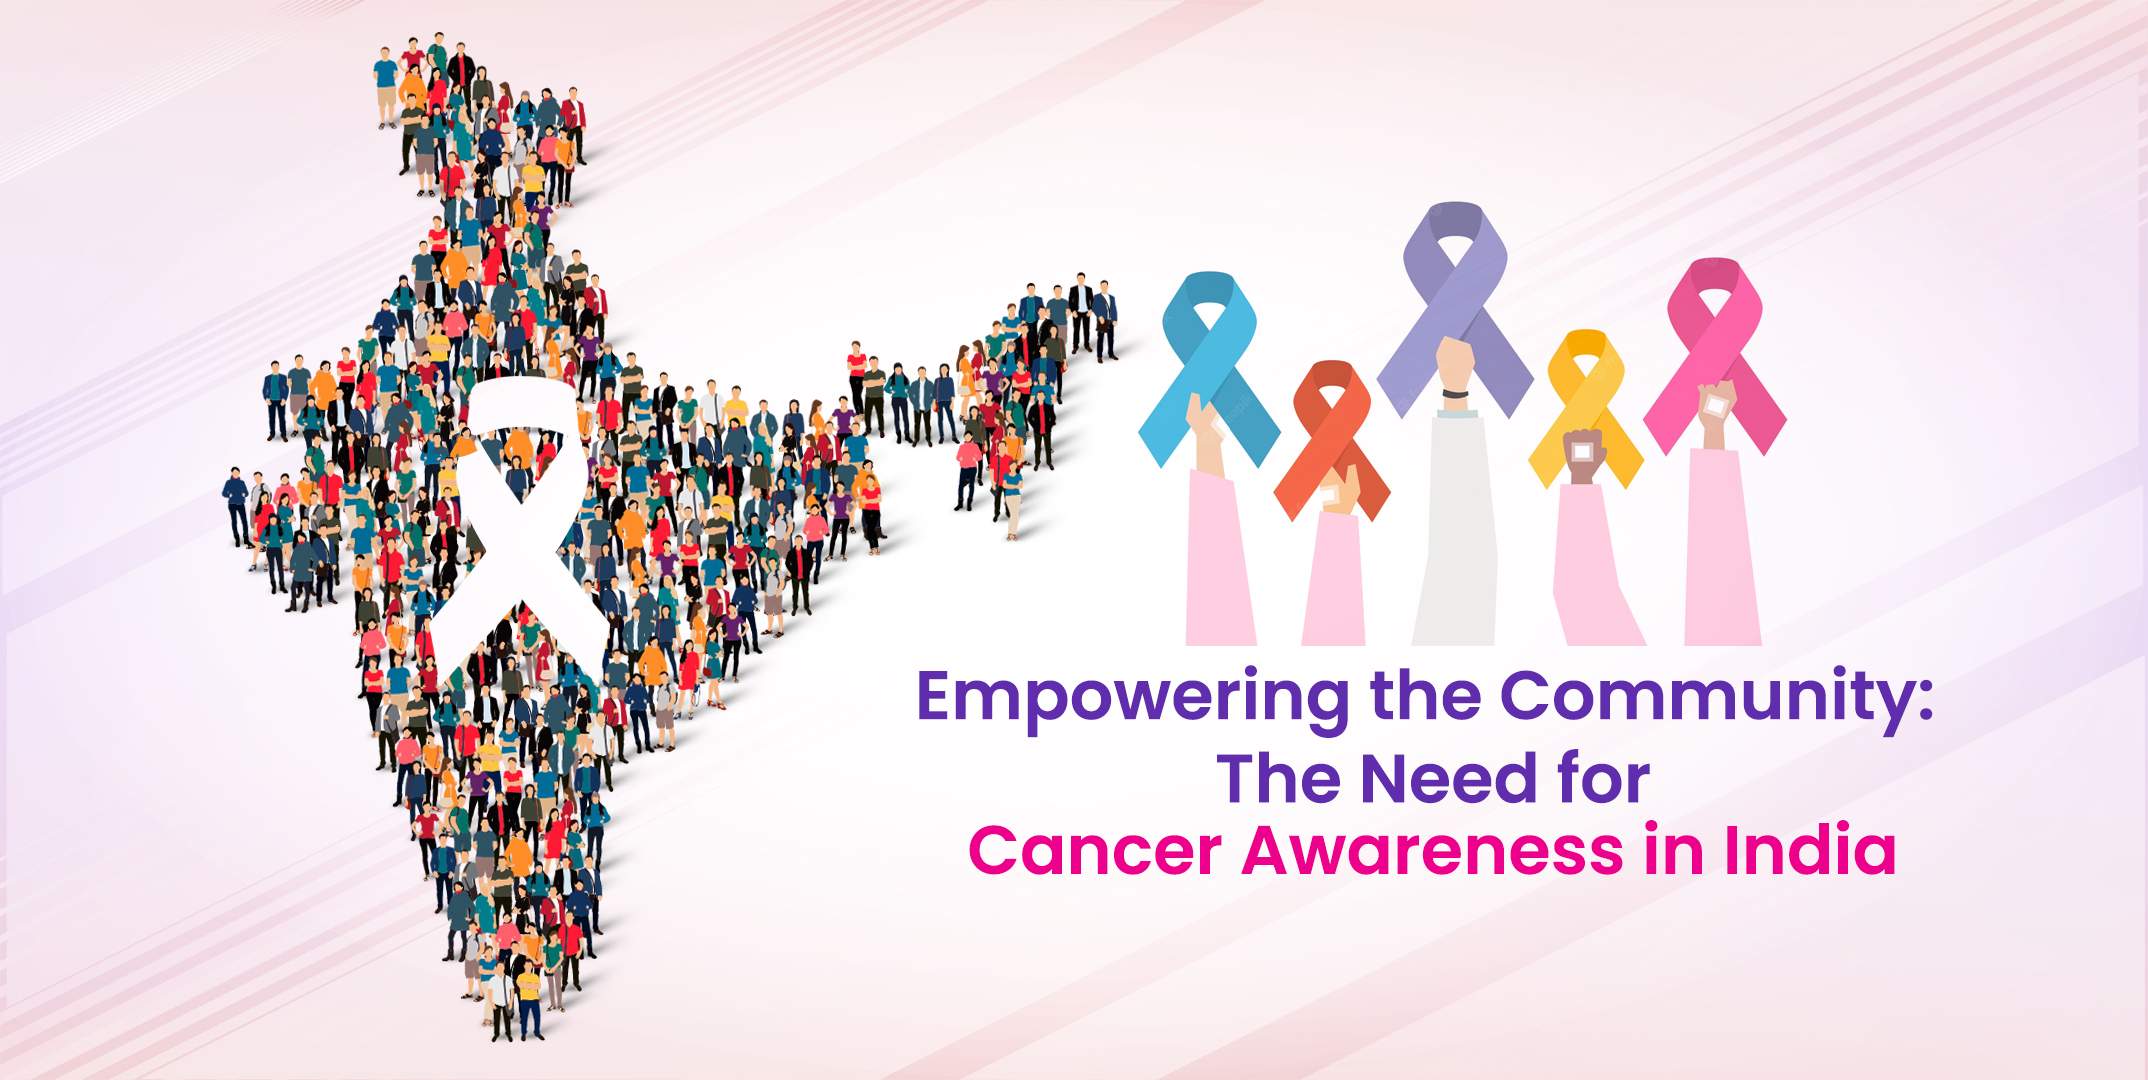 Empowering the Community: The Need for Cancer Awareness in India